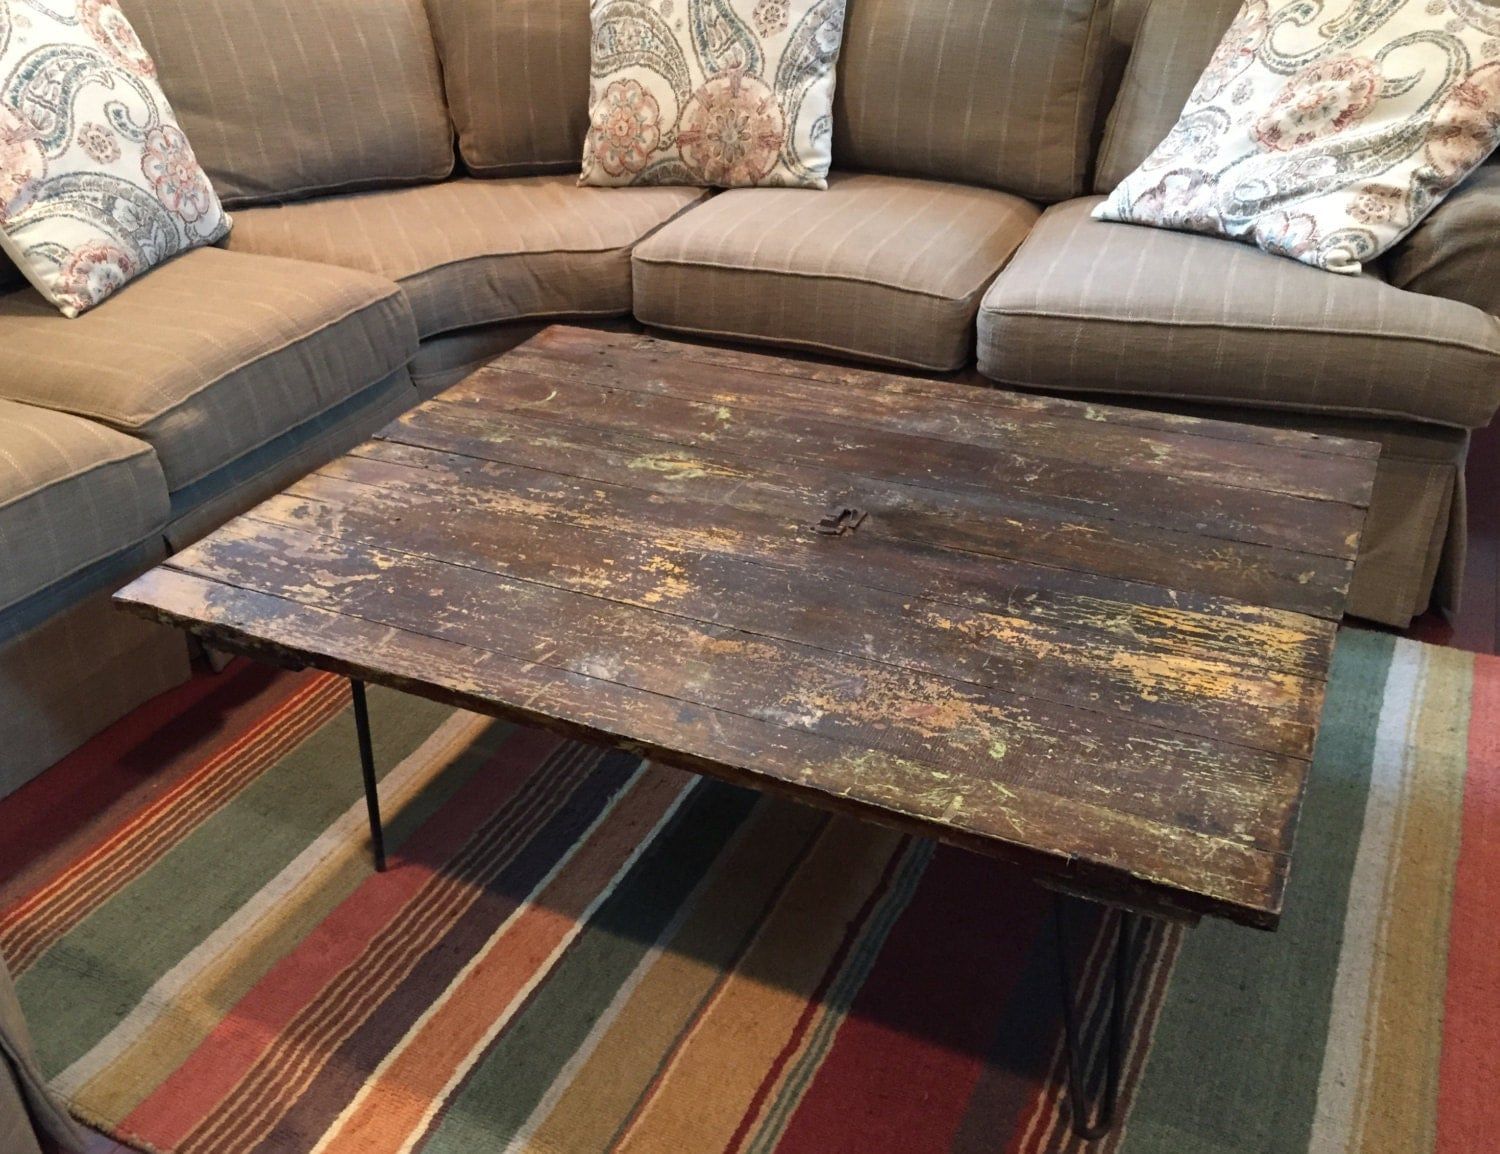 Reclaimed Shed/barn Door Coffee Table With Old Hardware And Within Coffee Tables With Sliding Barn Doors (Gallery 10 of 20)